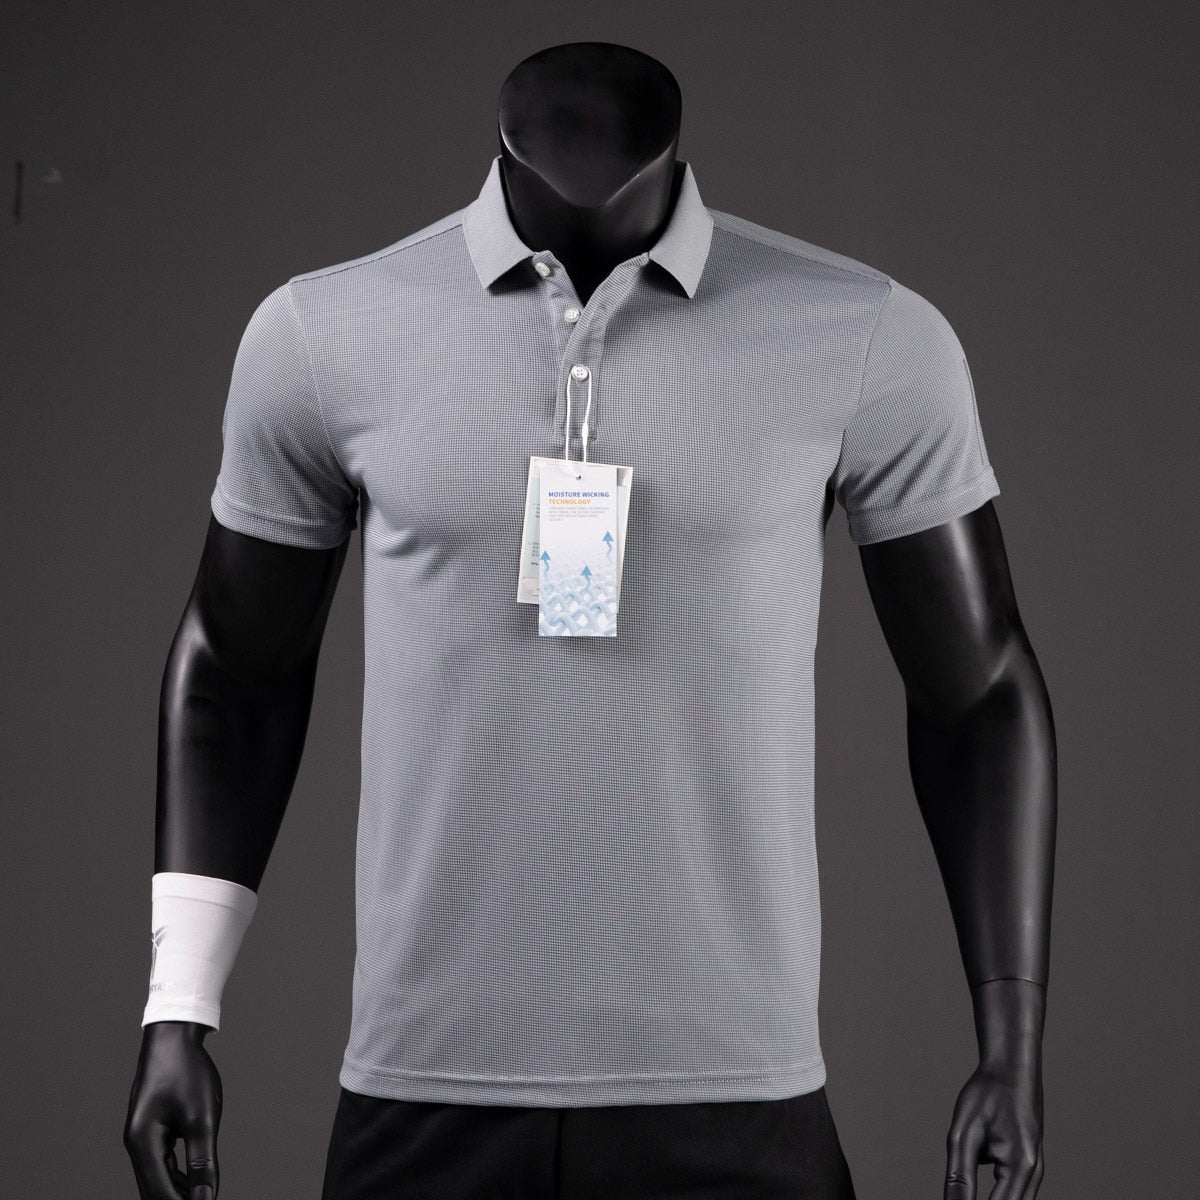 Men's Luxury Quick-Drying Golf Polo Shirt - Breathable Lapel Short-Sleeved Tee for Summer